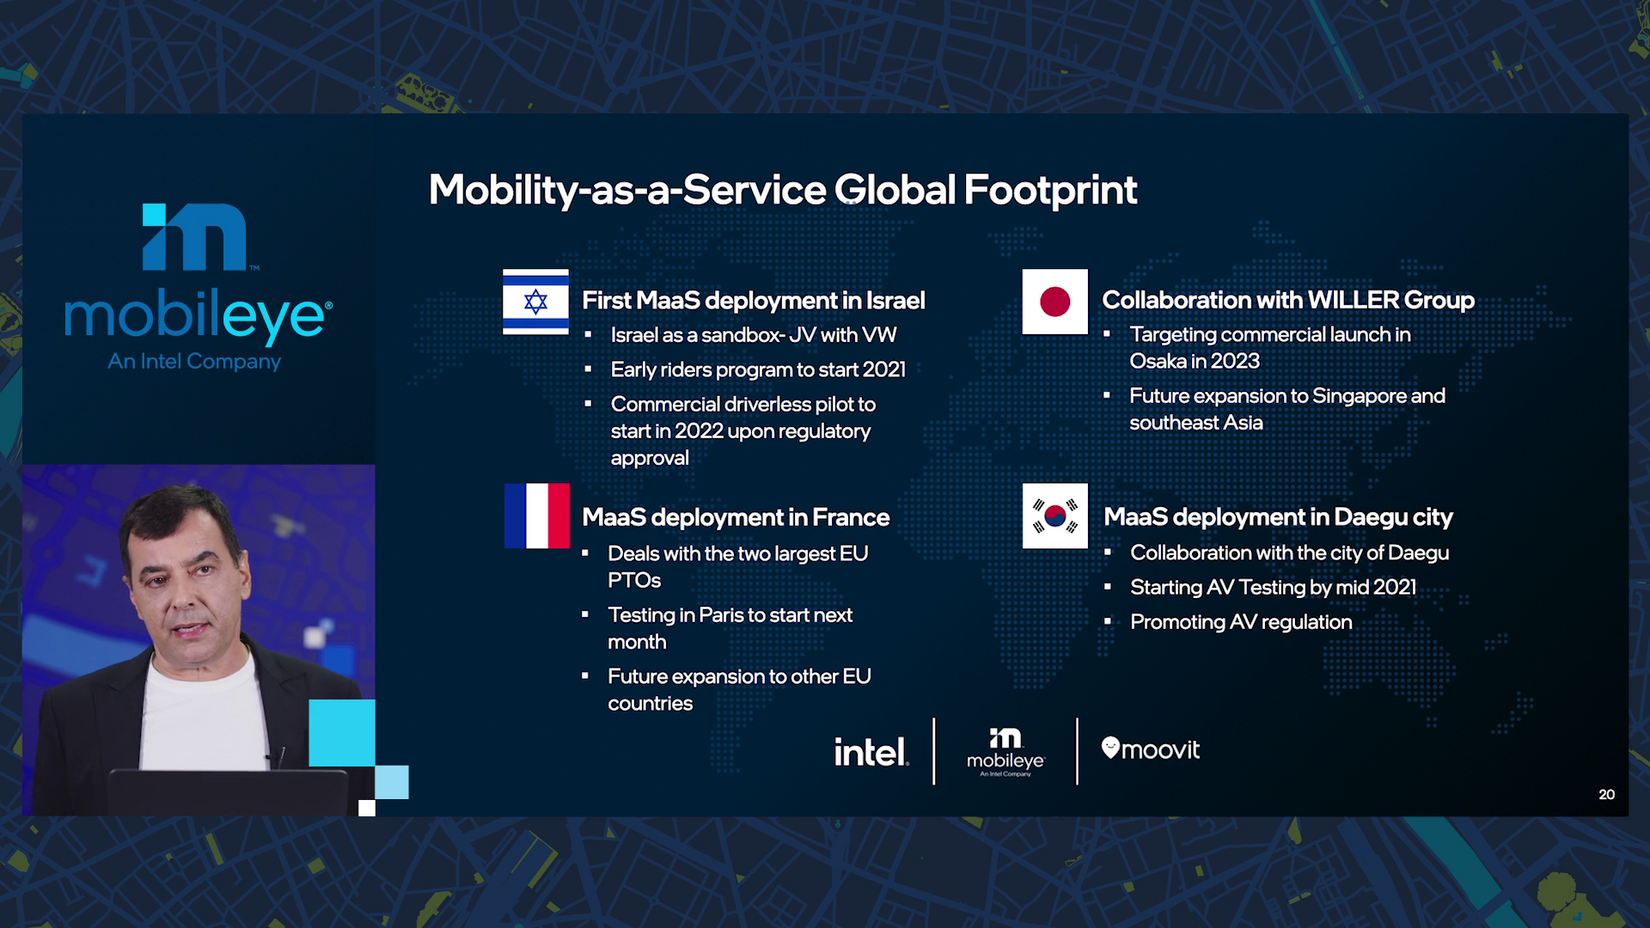 Mobility-as-a-service global footprint